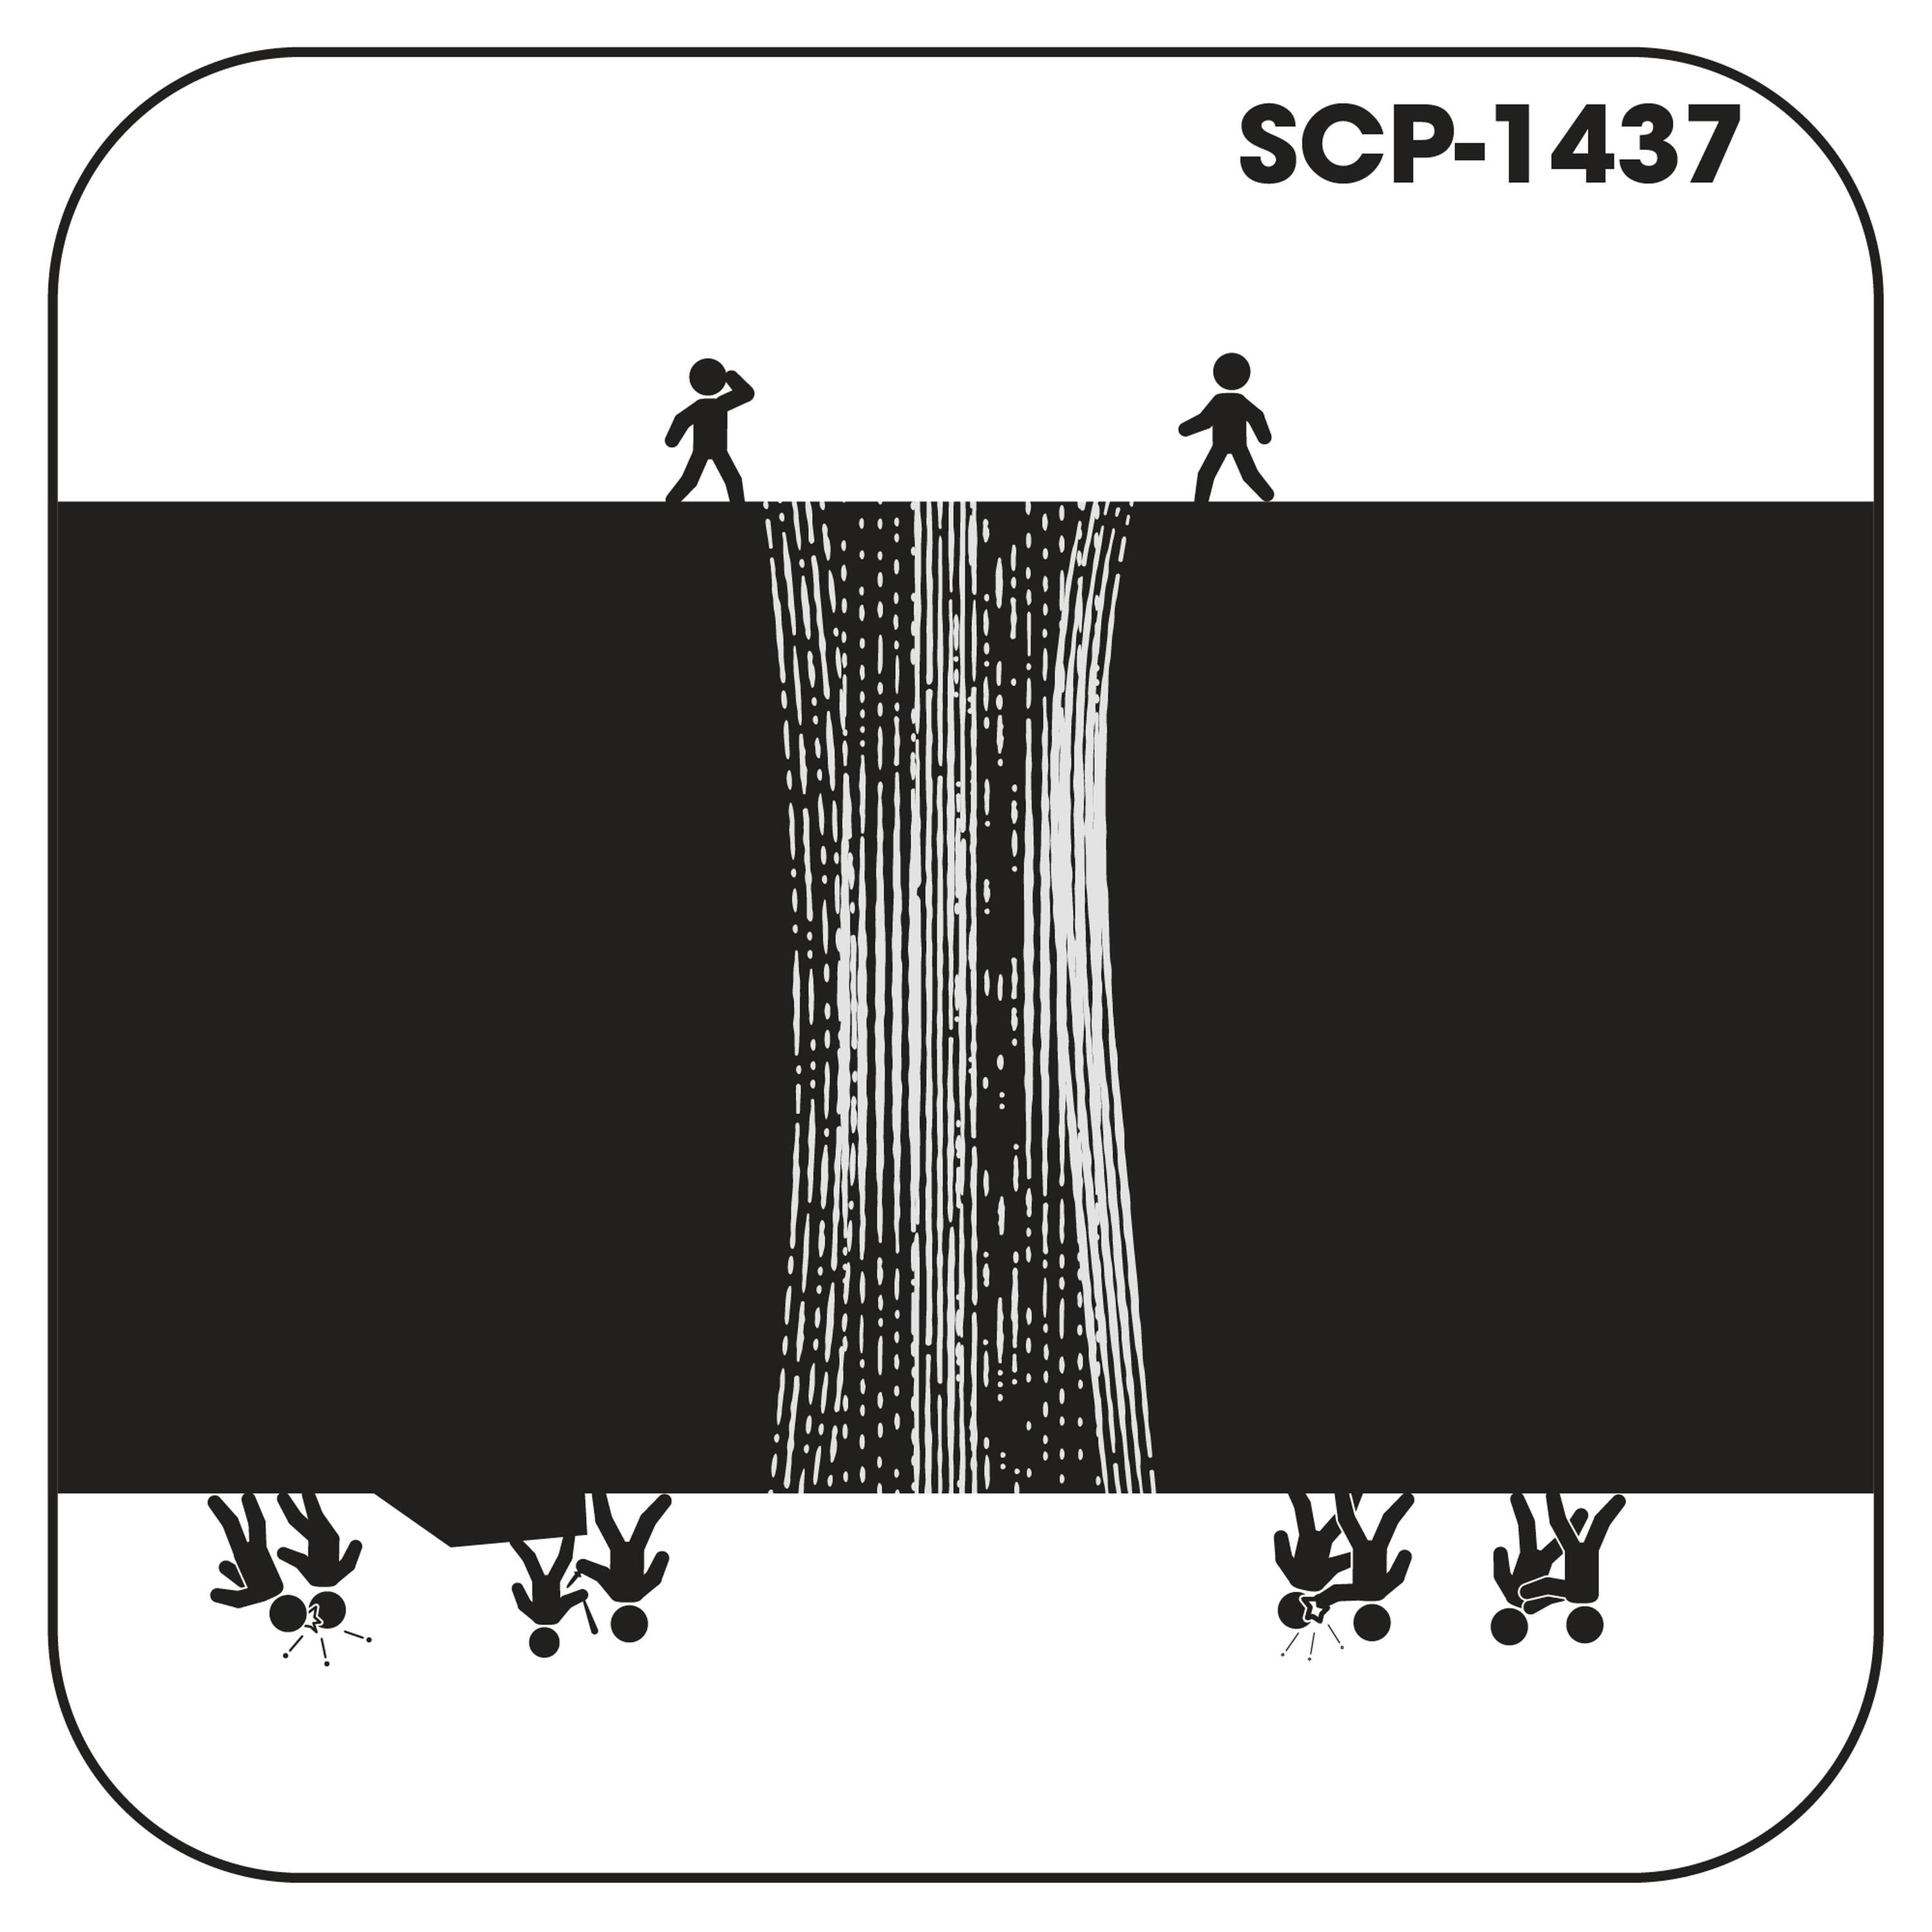 On This Episode of Haunt Patrol, SCP-2733, Podcast